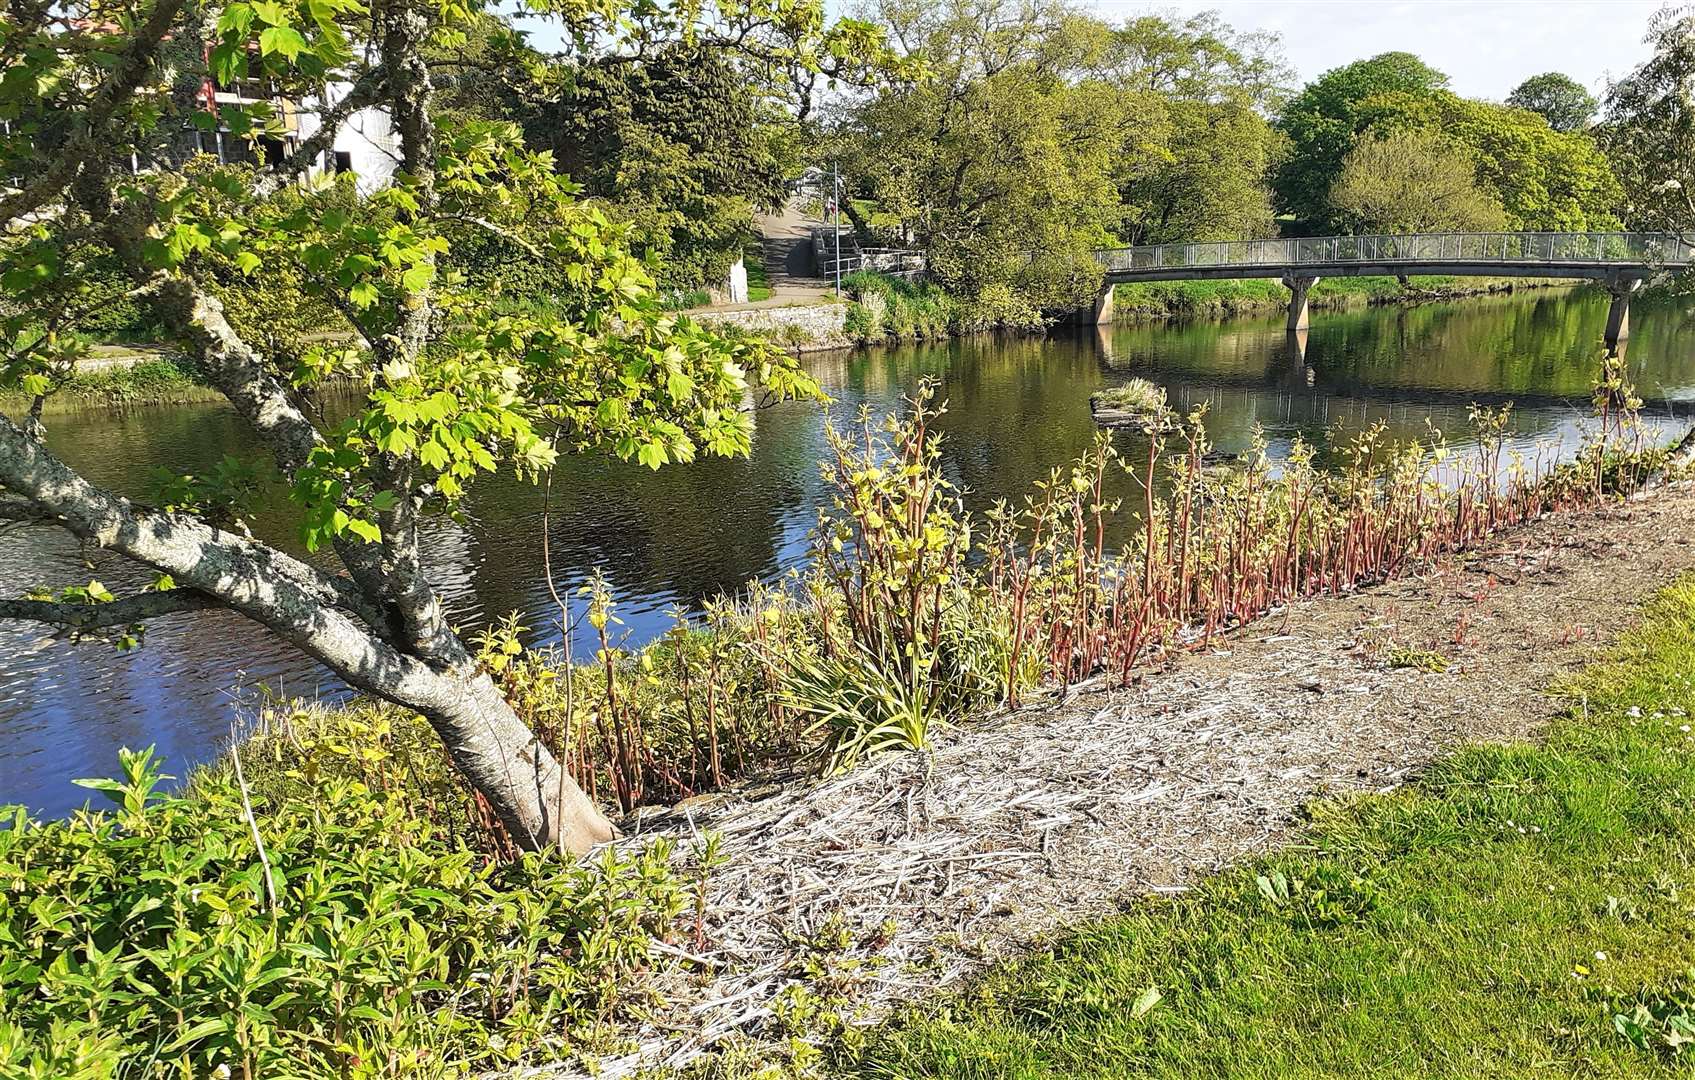 Japanese knotweed growing along the banks of River Thurso at Mill End. Picture: A Glasgow